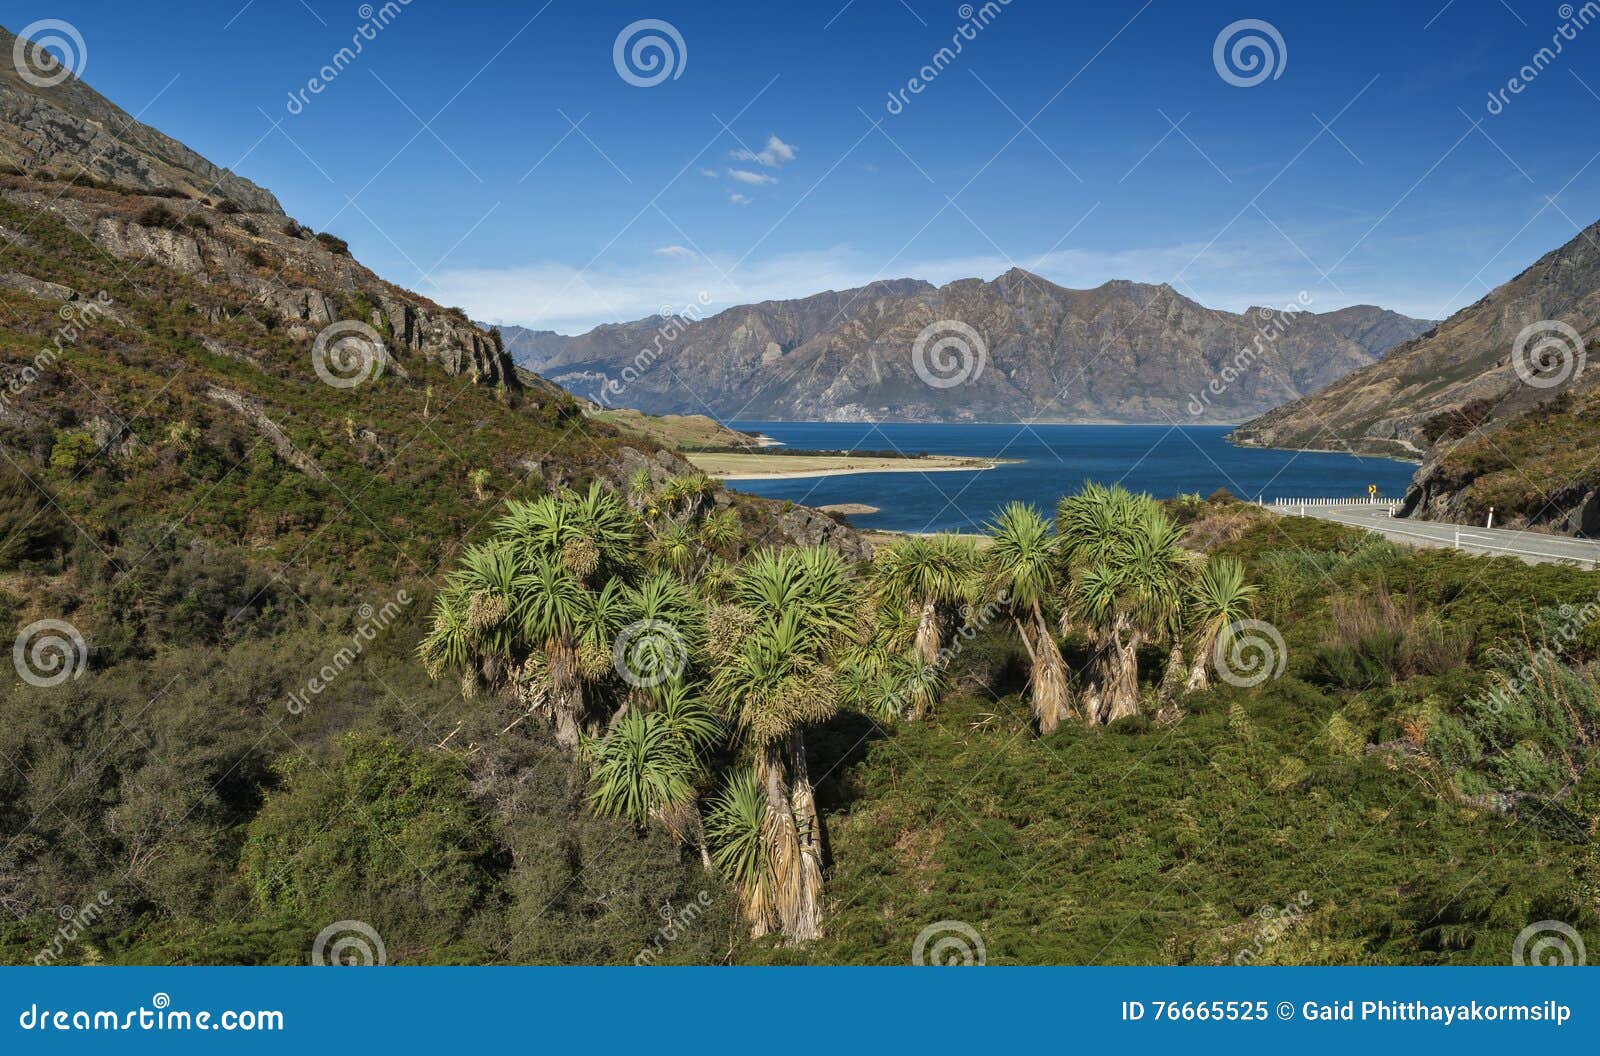 the neck, viewpoint of lake wanaka and lake hawea, new zealand at their closest point